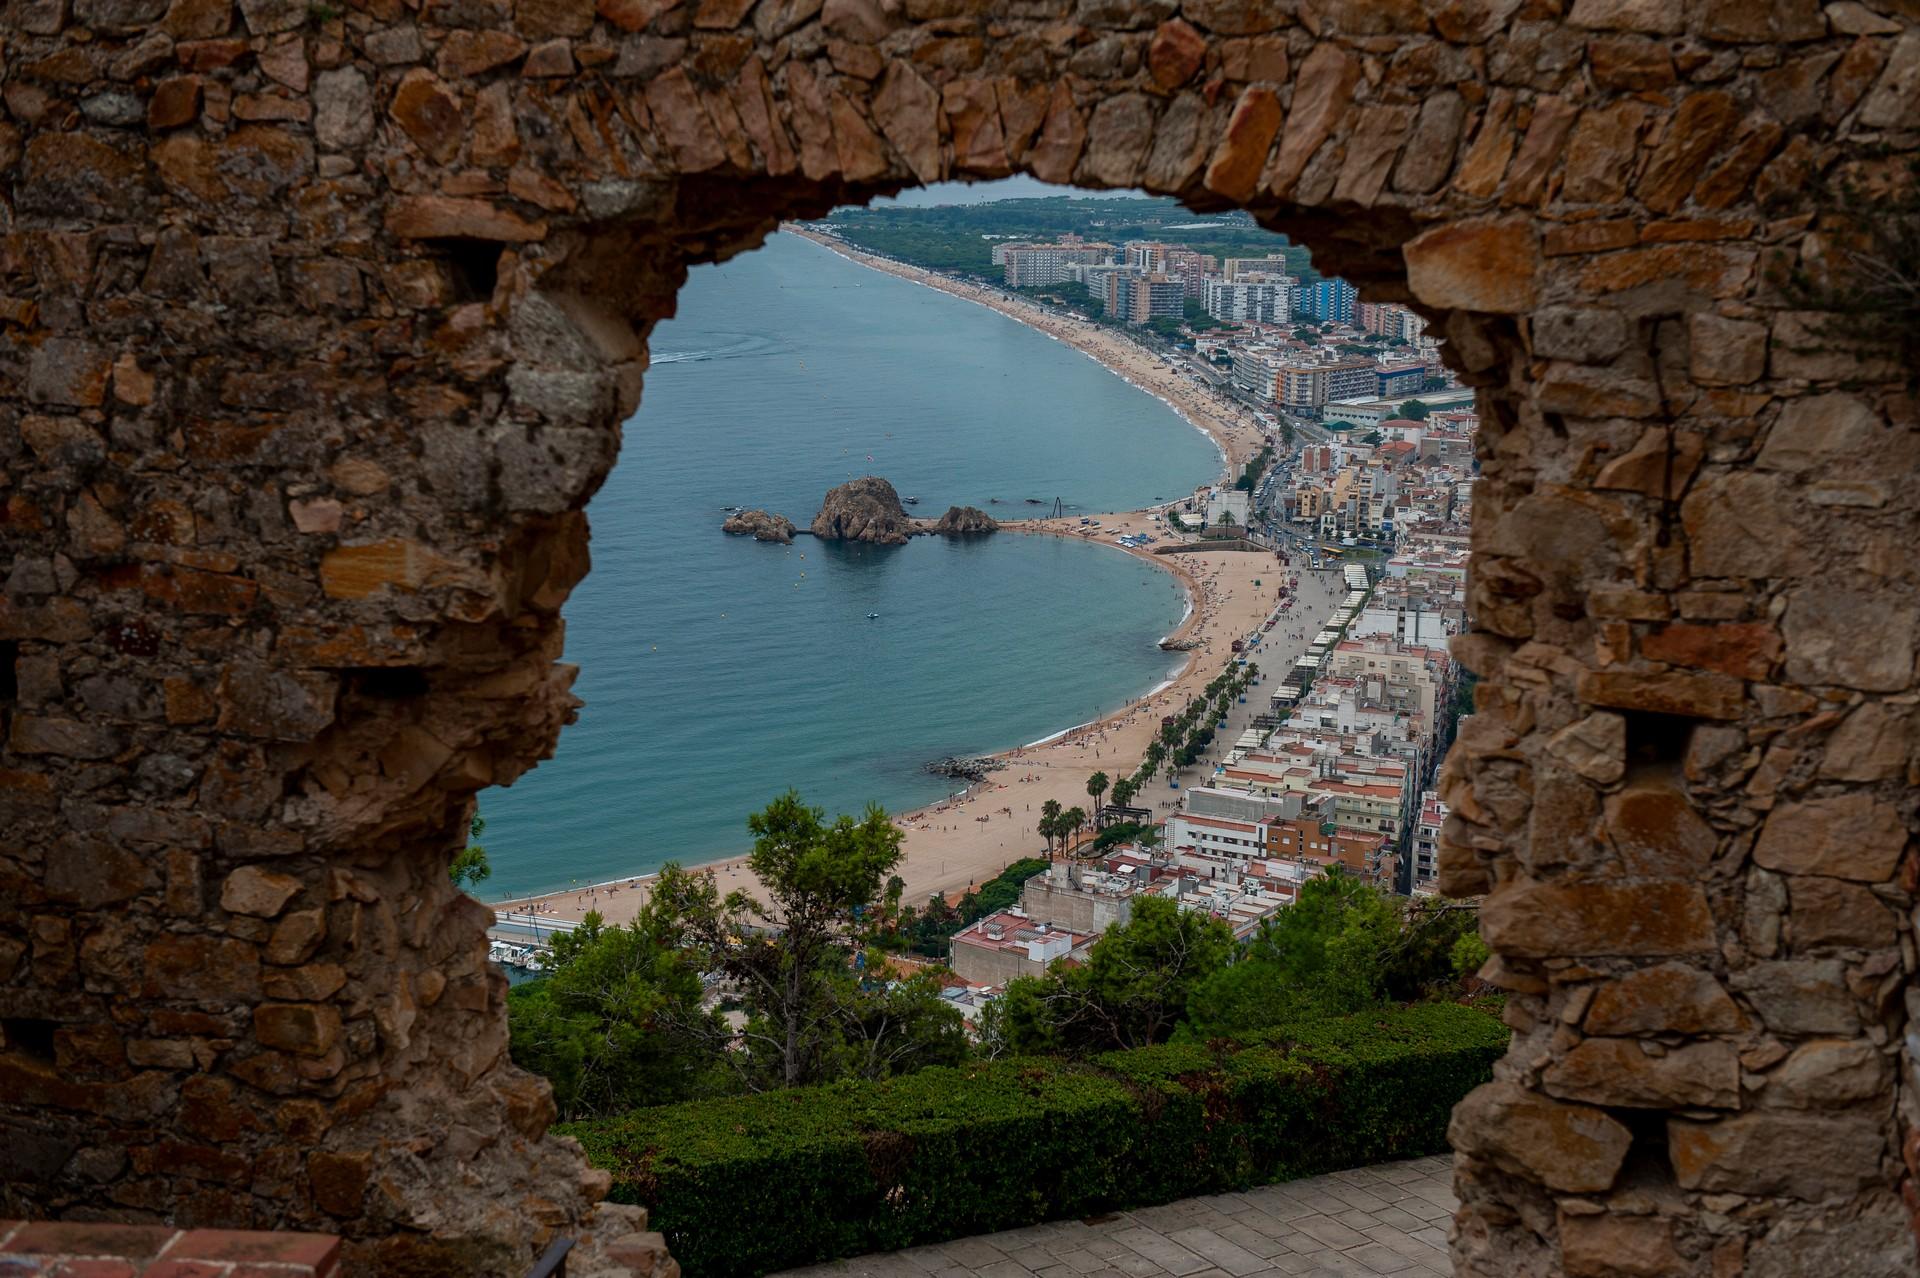 Architecture in Blanes